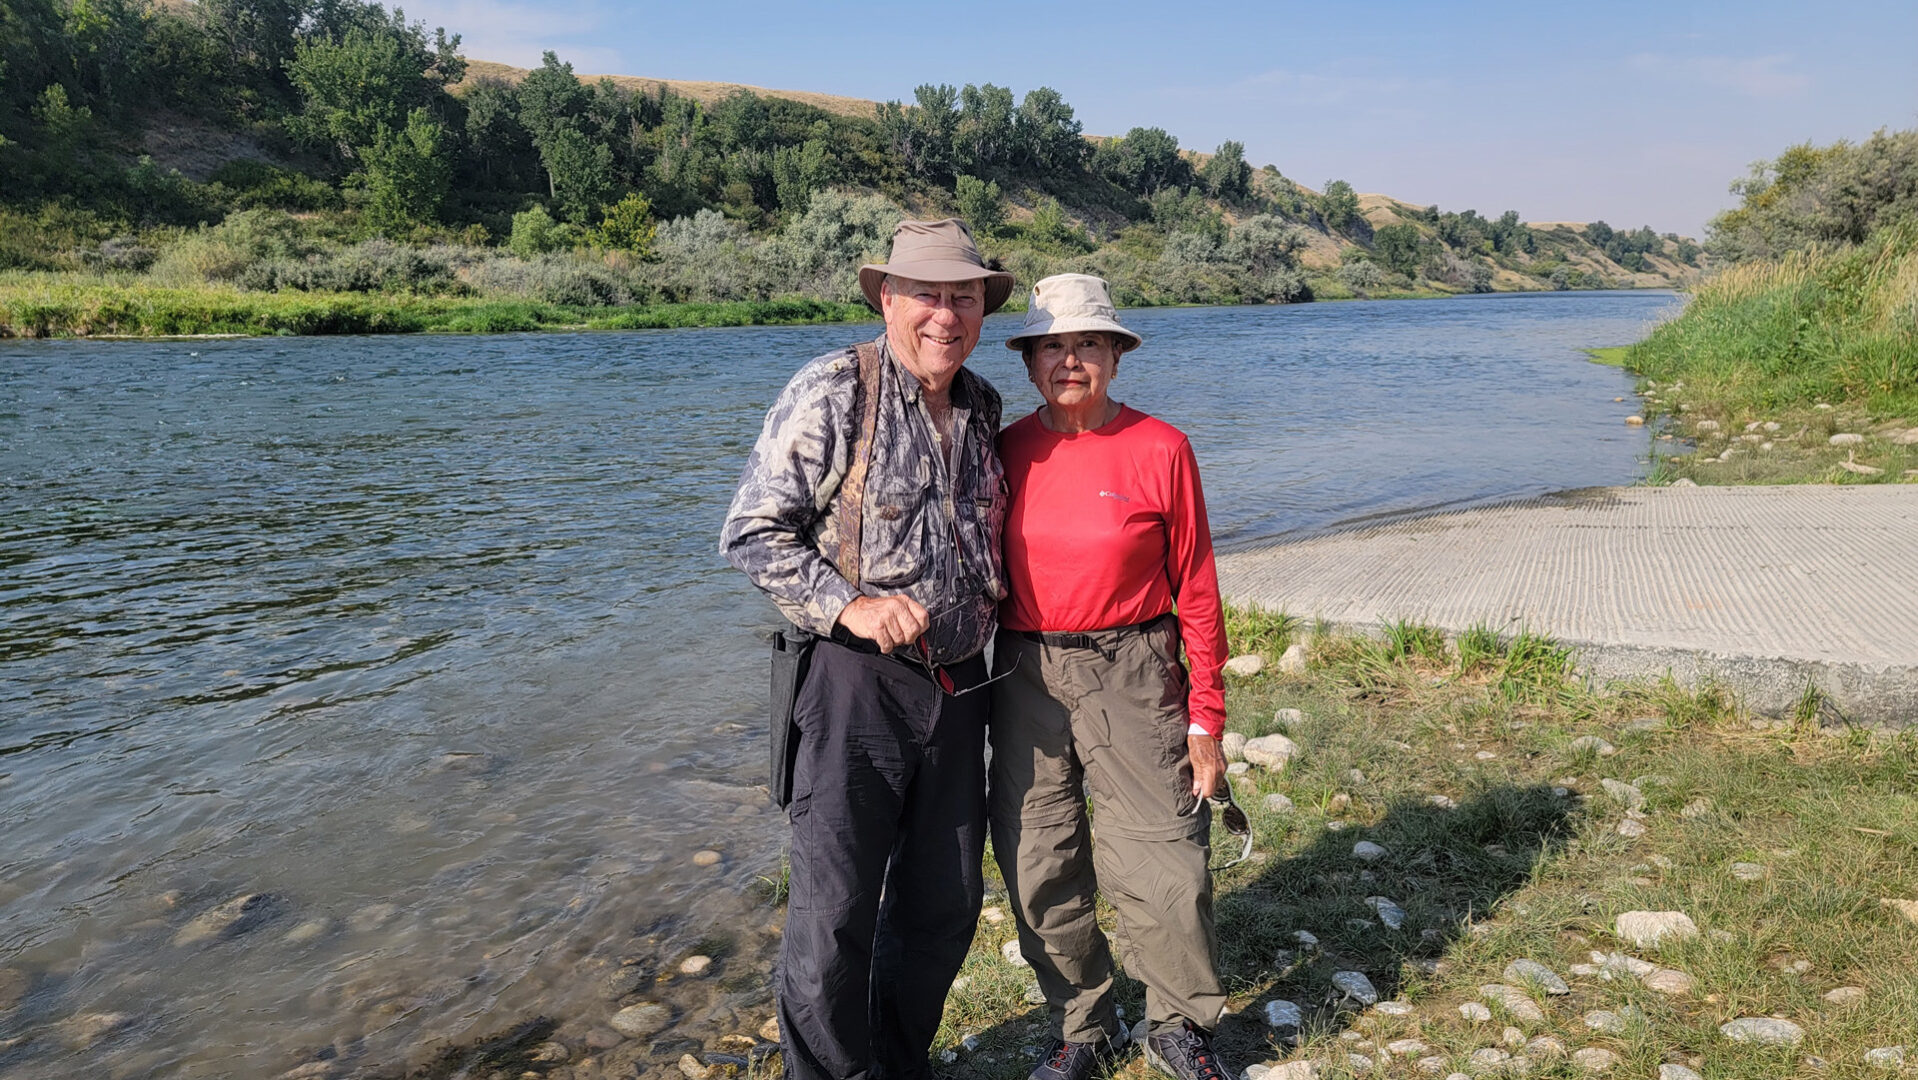 Deane and Donna on the Big Horn River